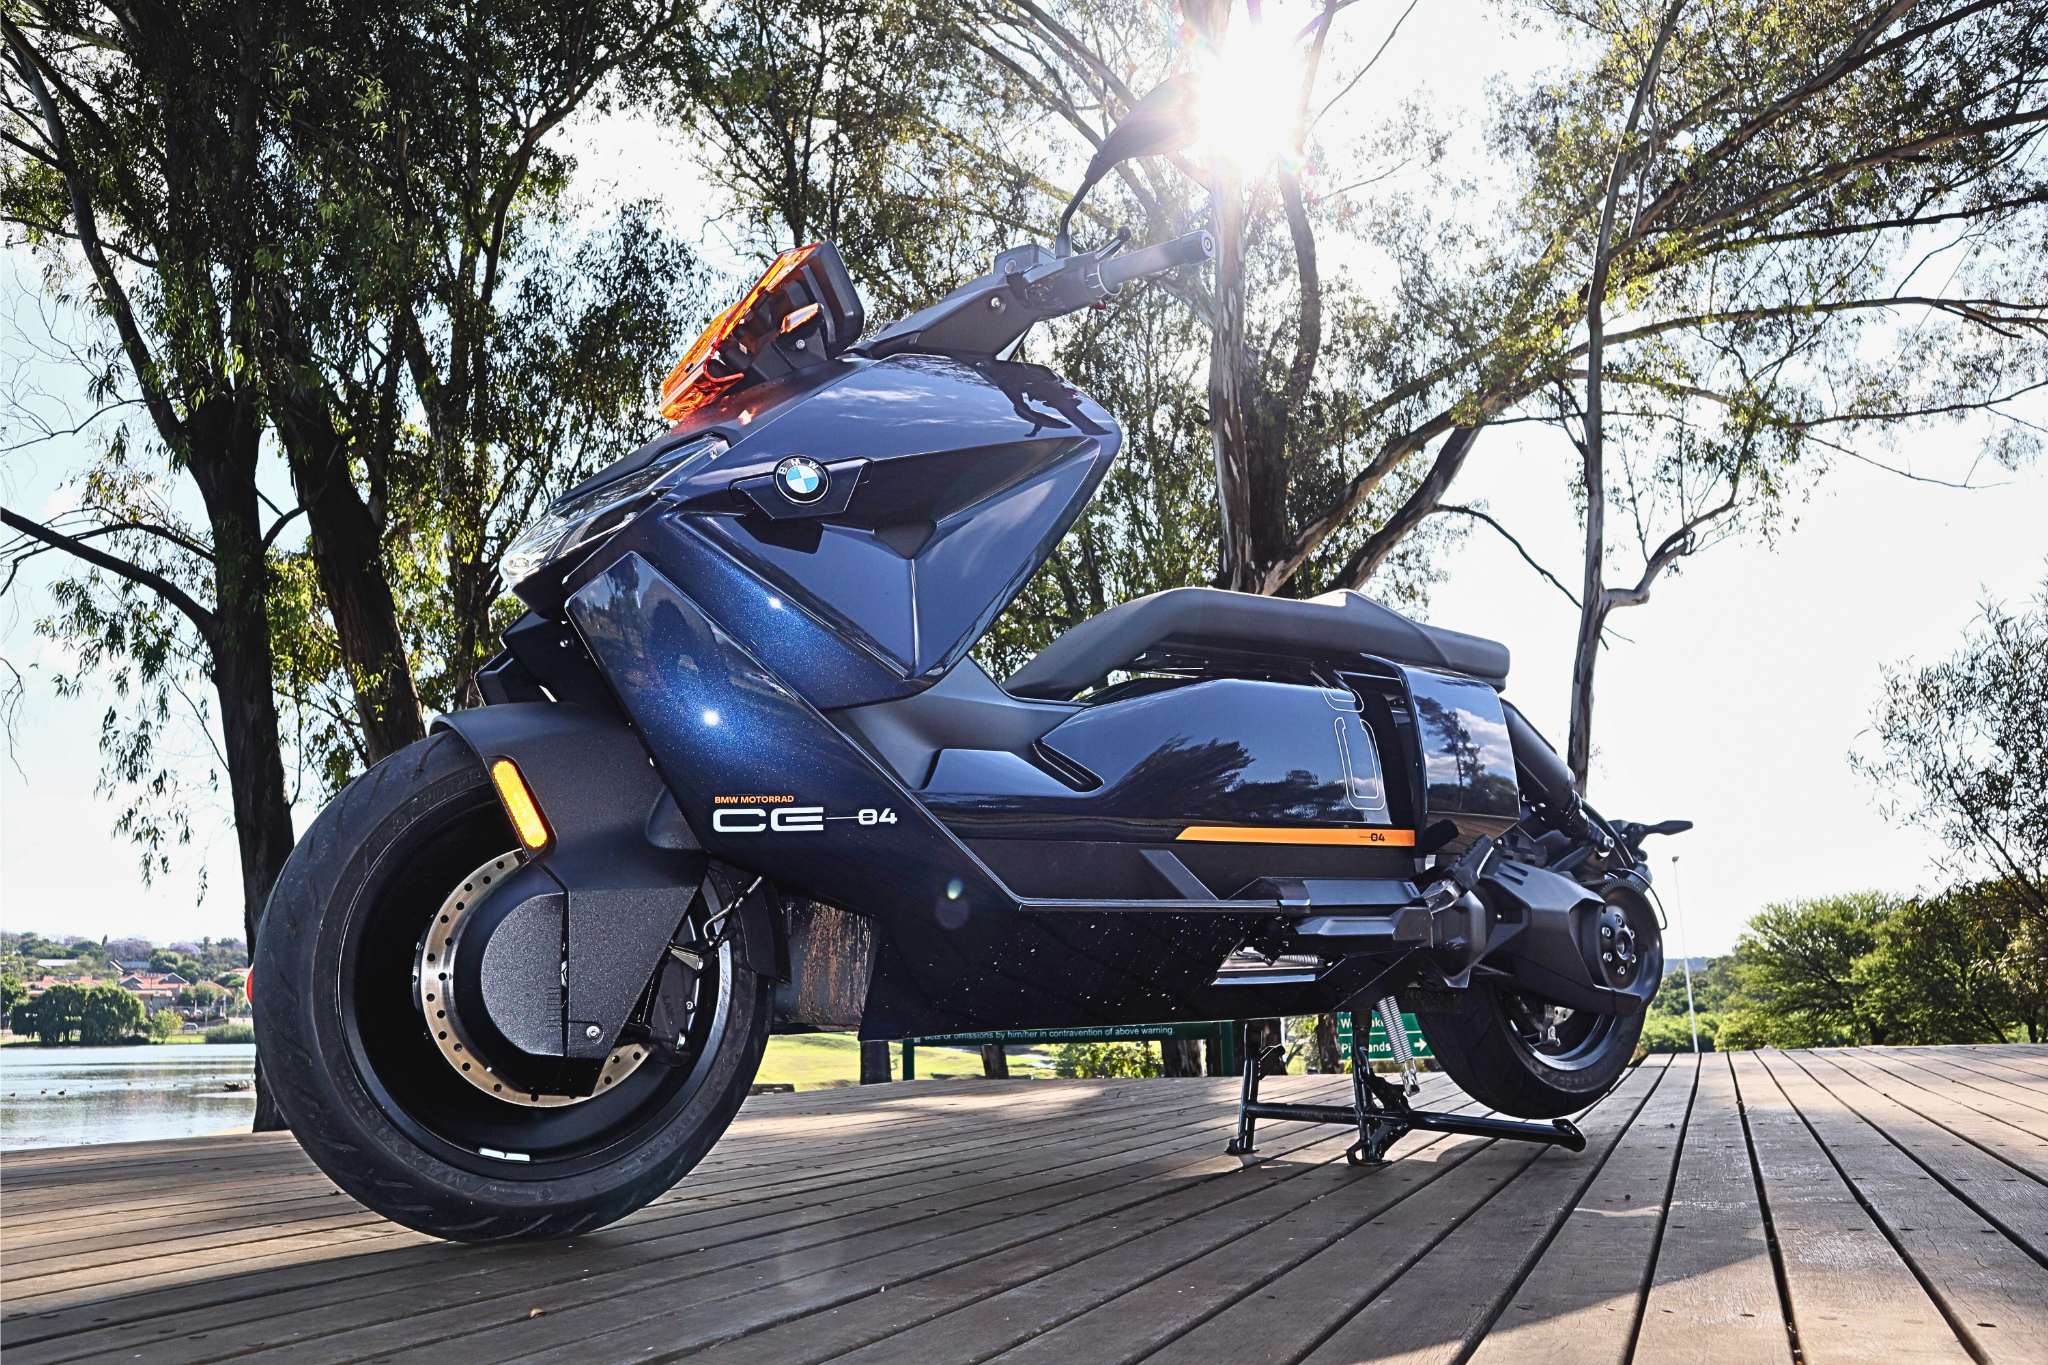 First Look: The new BMW CE 04 Electric Scooter - ZA Bikers